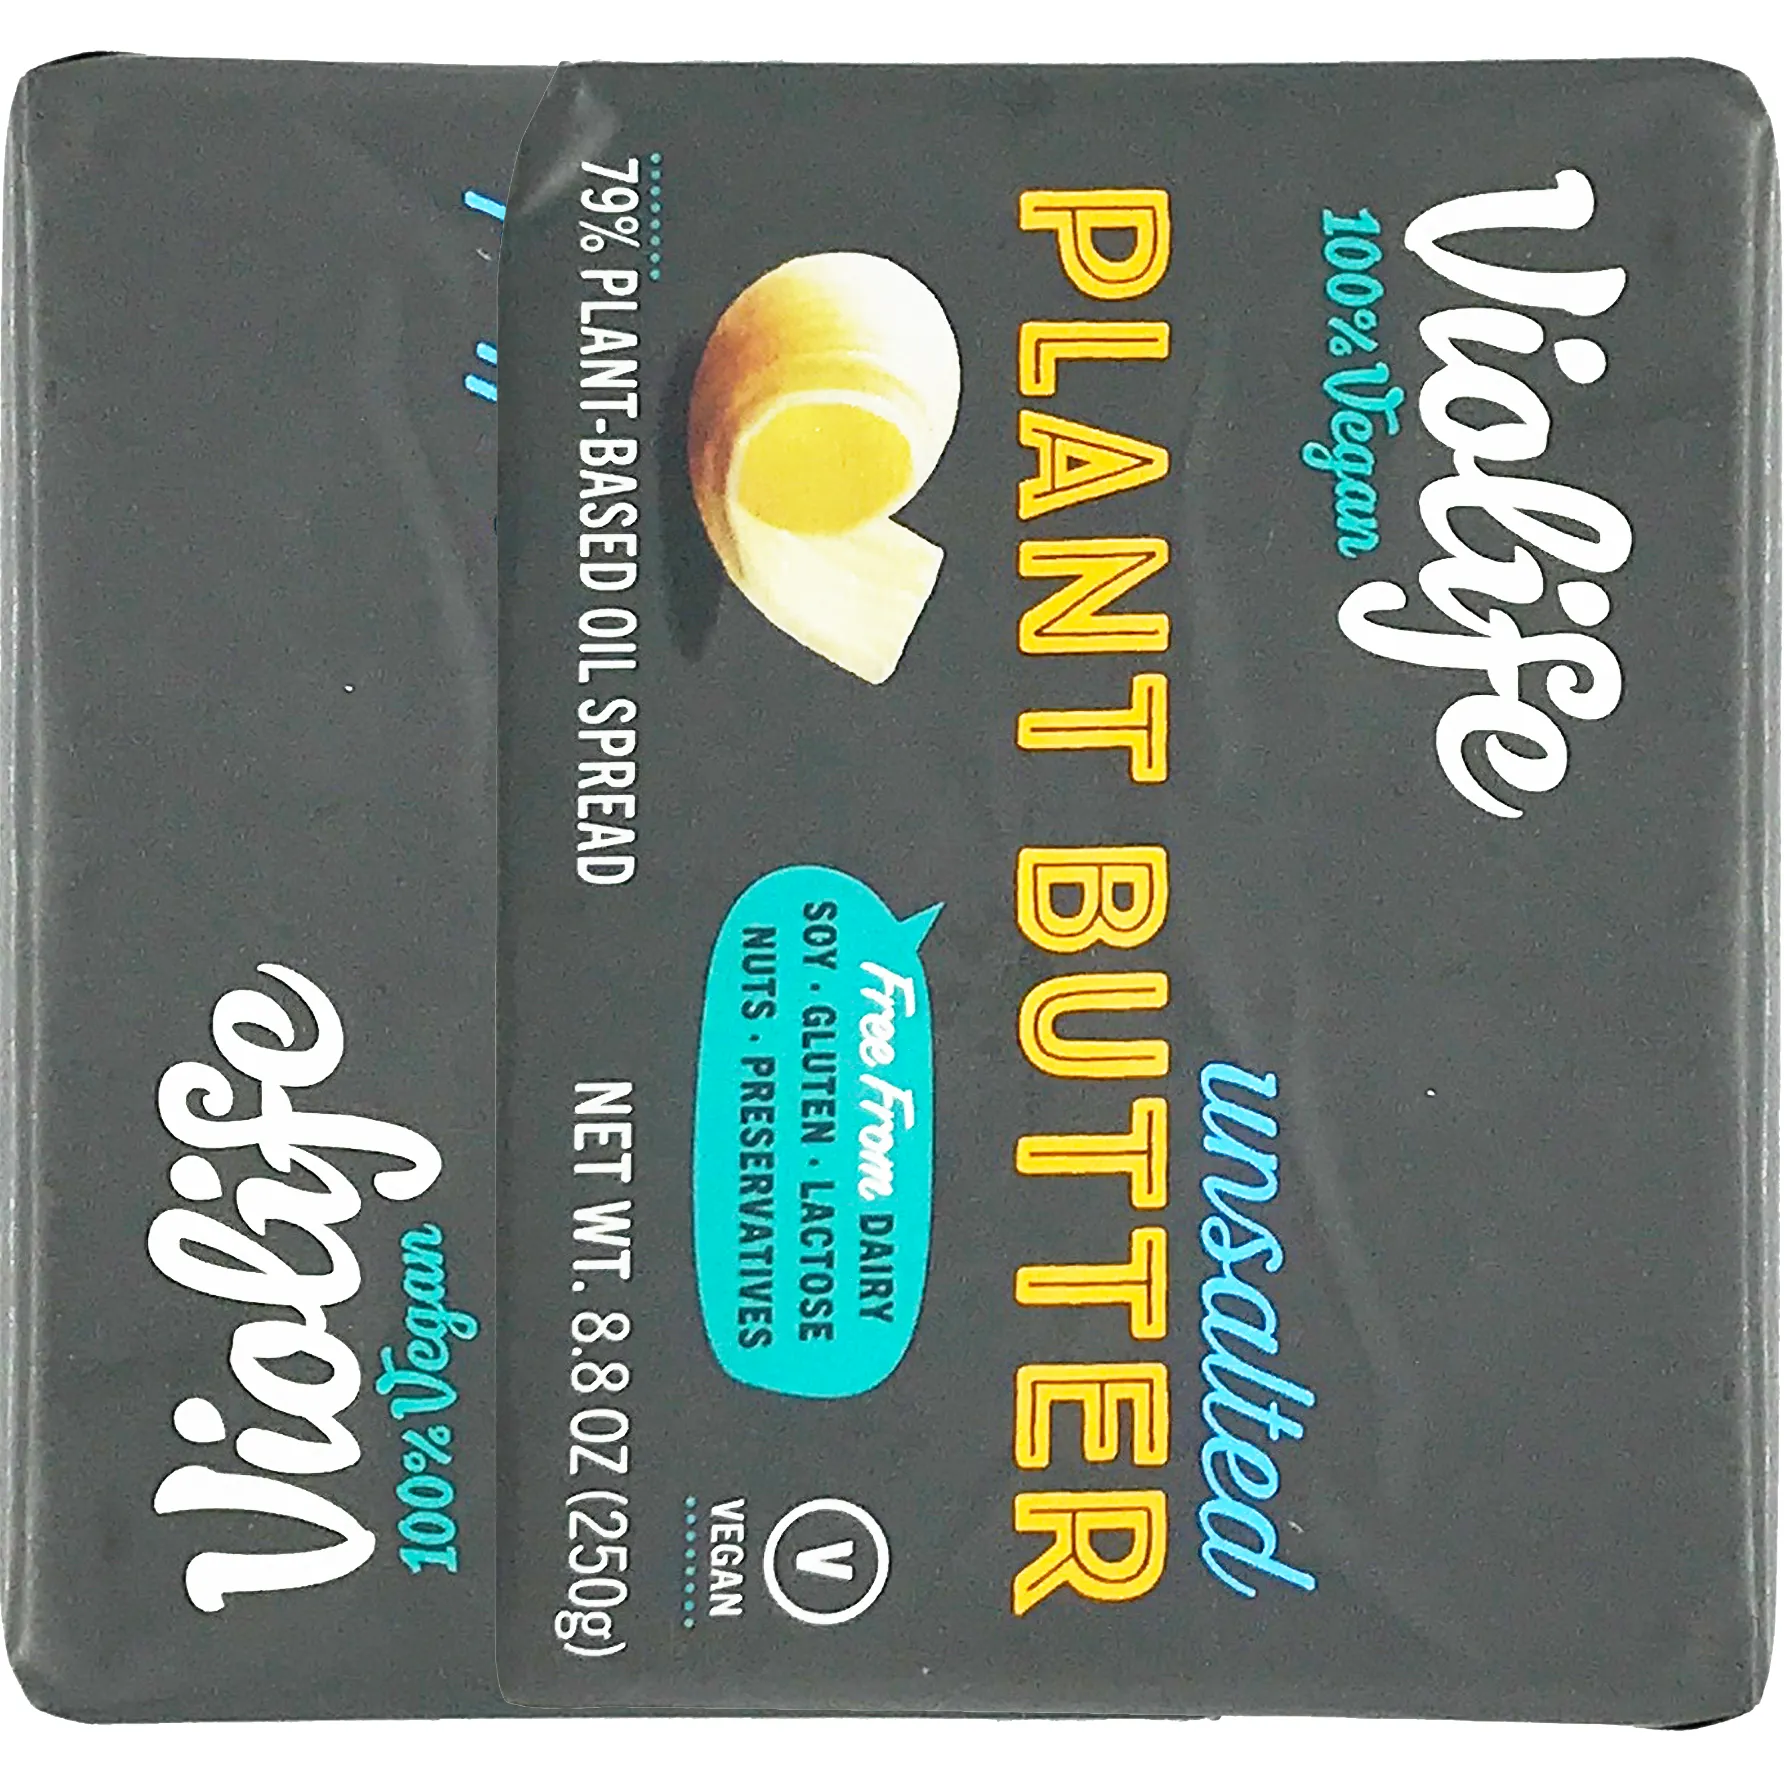 Free Violife Plant Butter At Select Stores